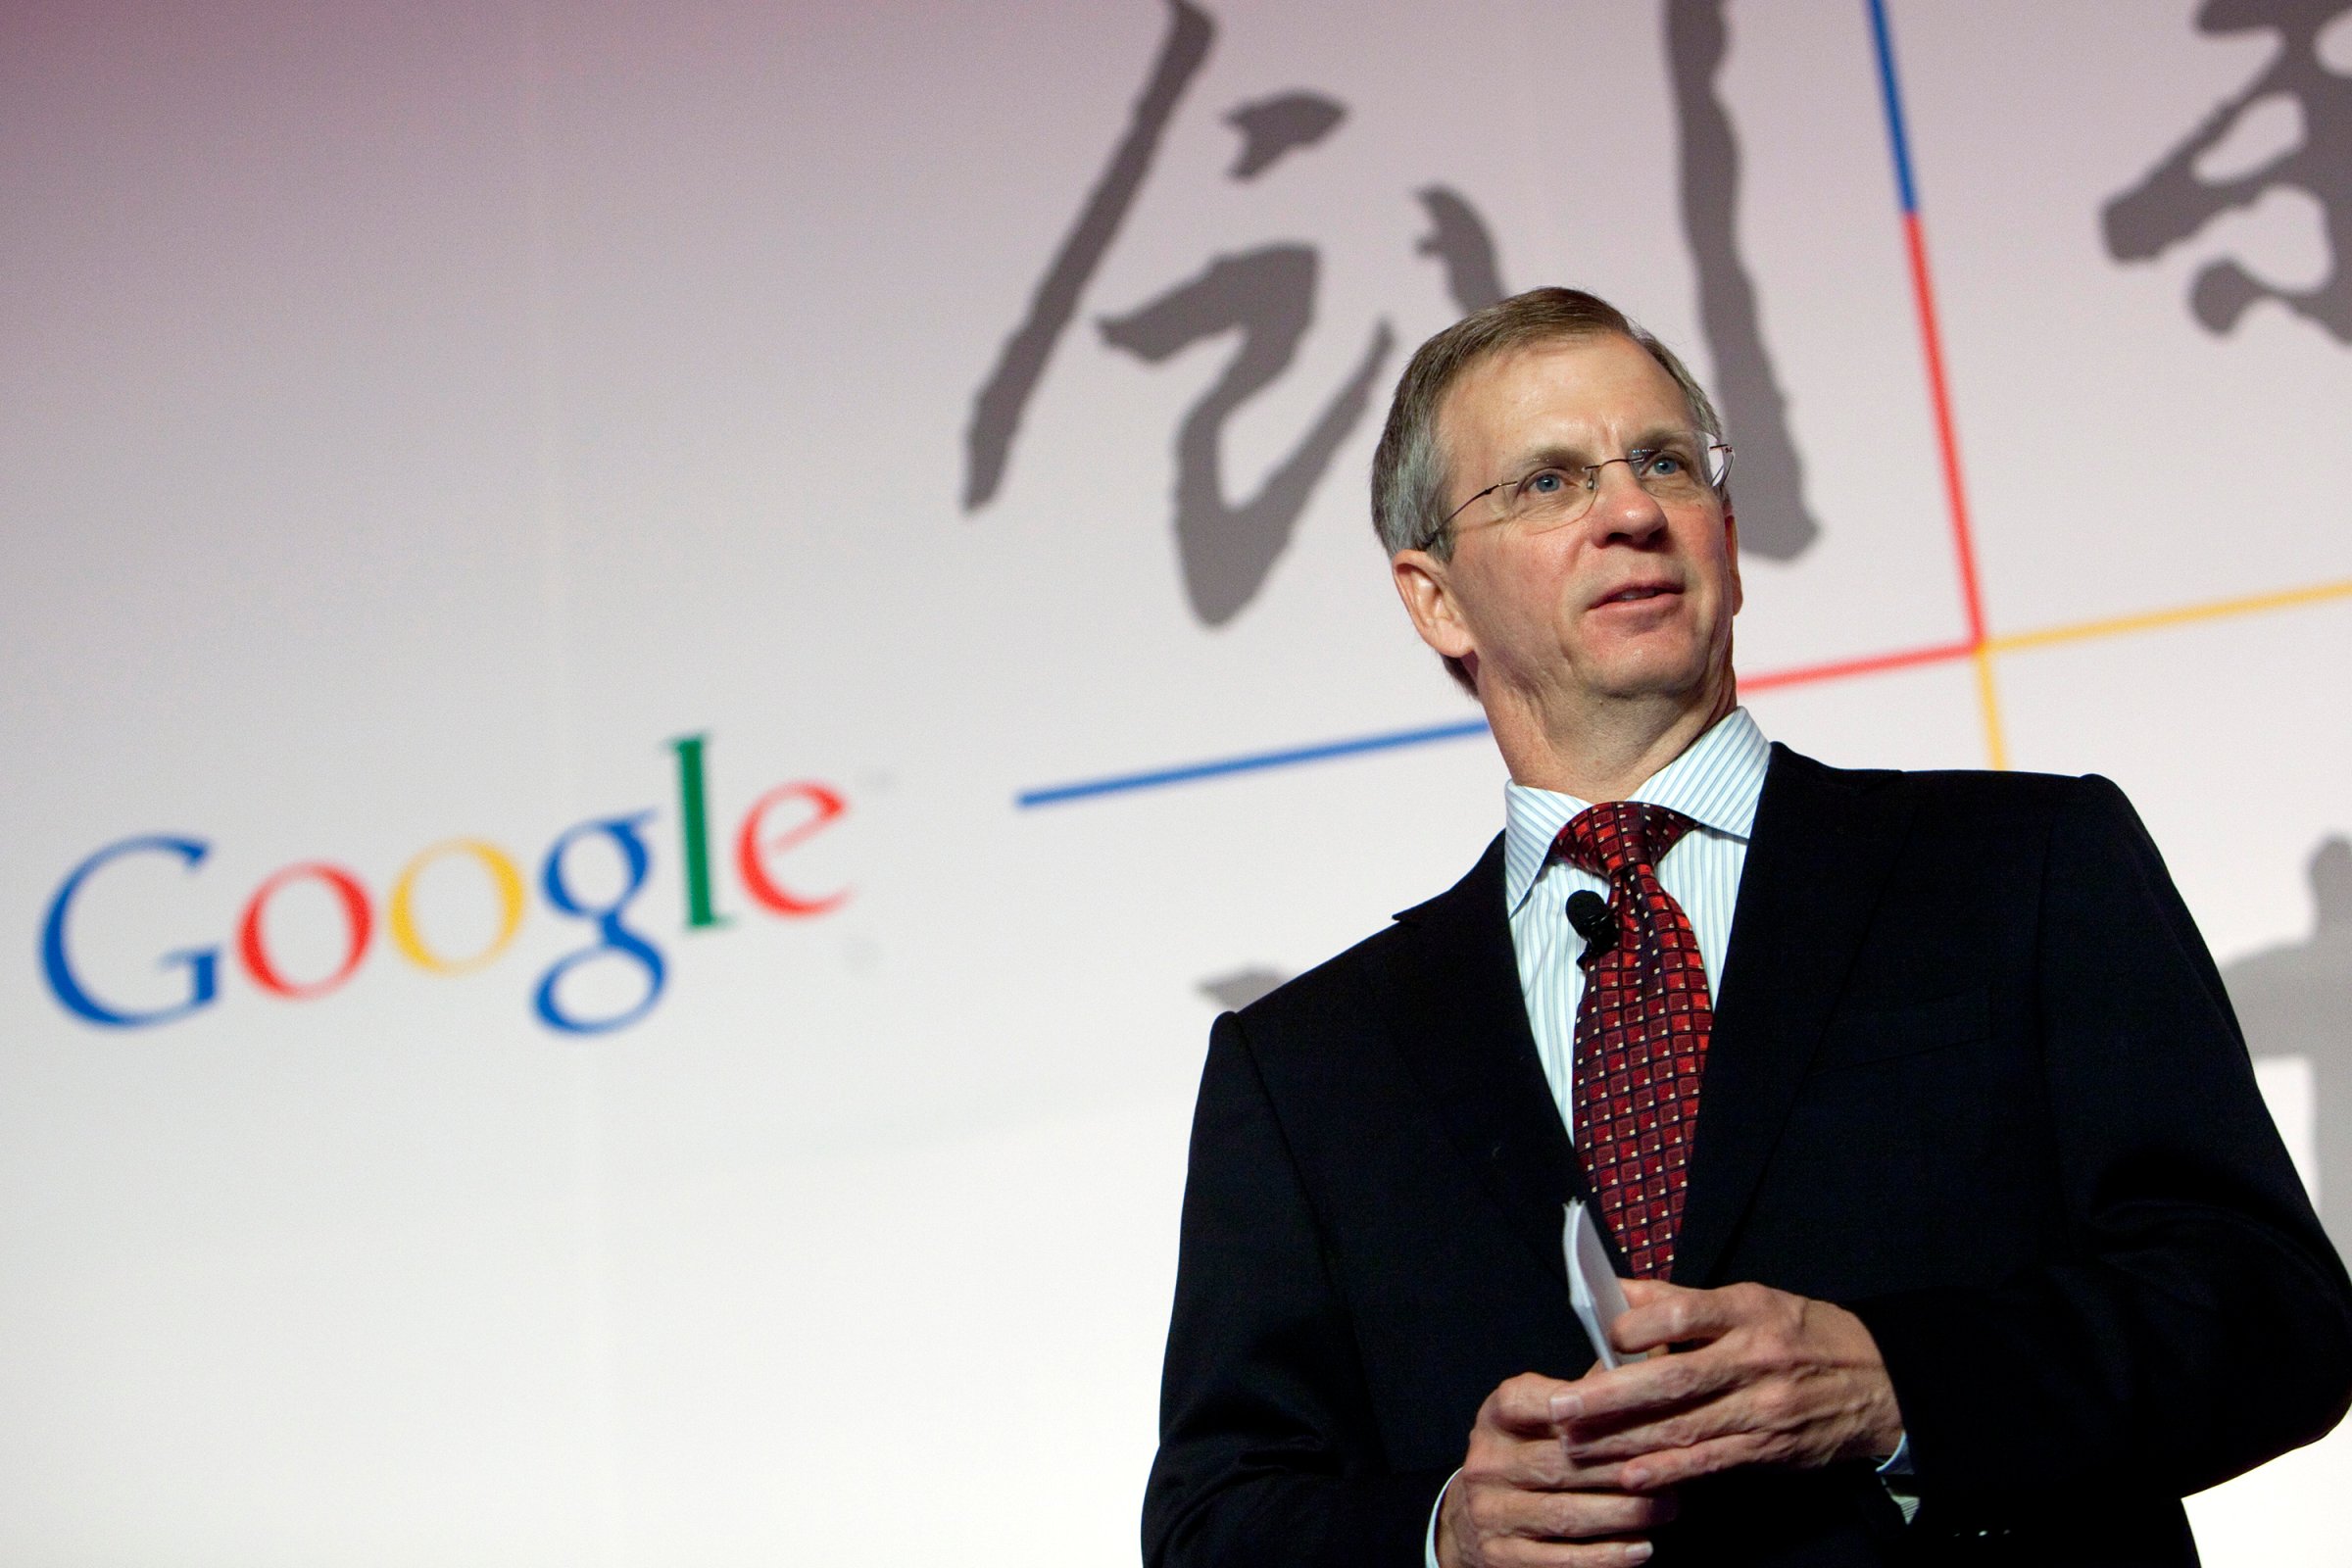 Google Aims To Boost Video, Banner Ad Business In China